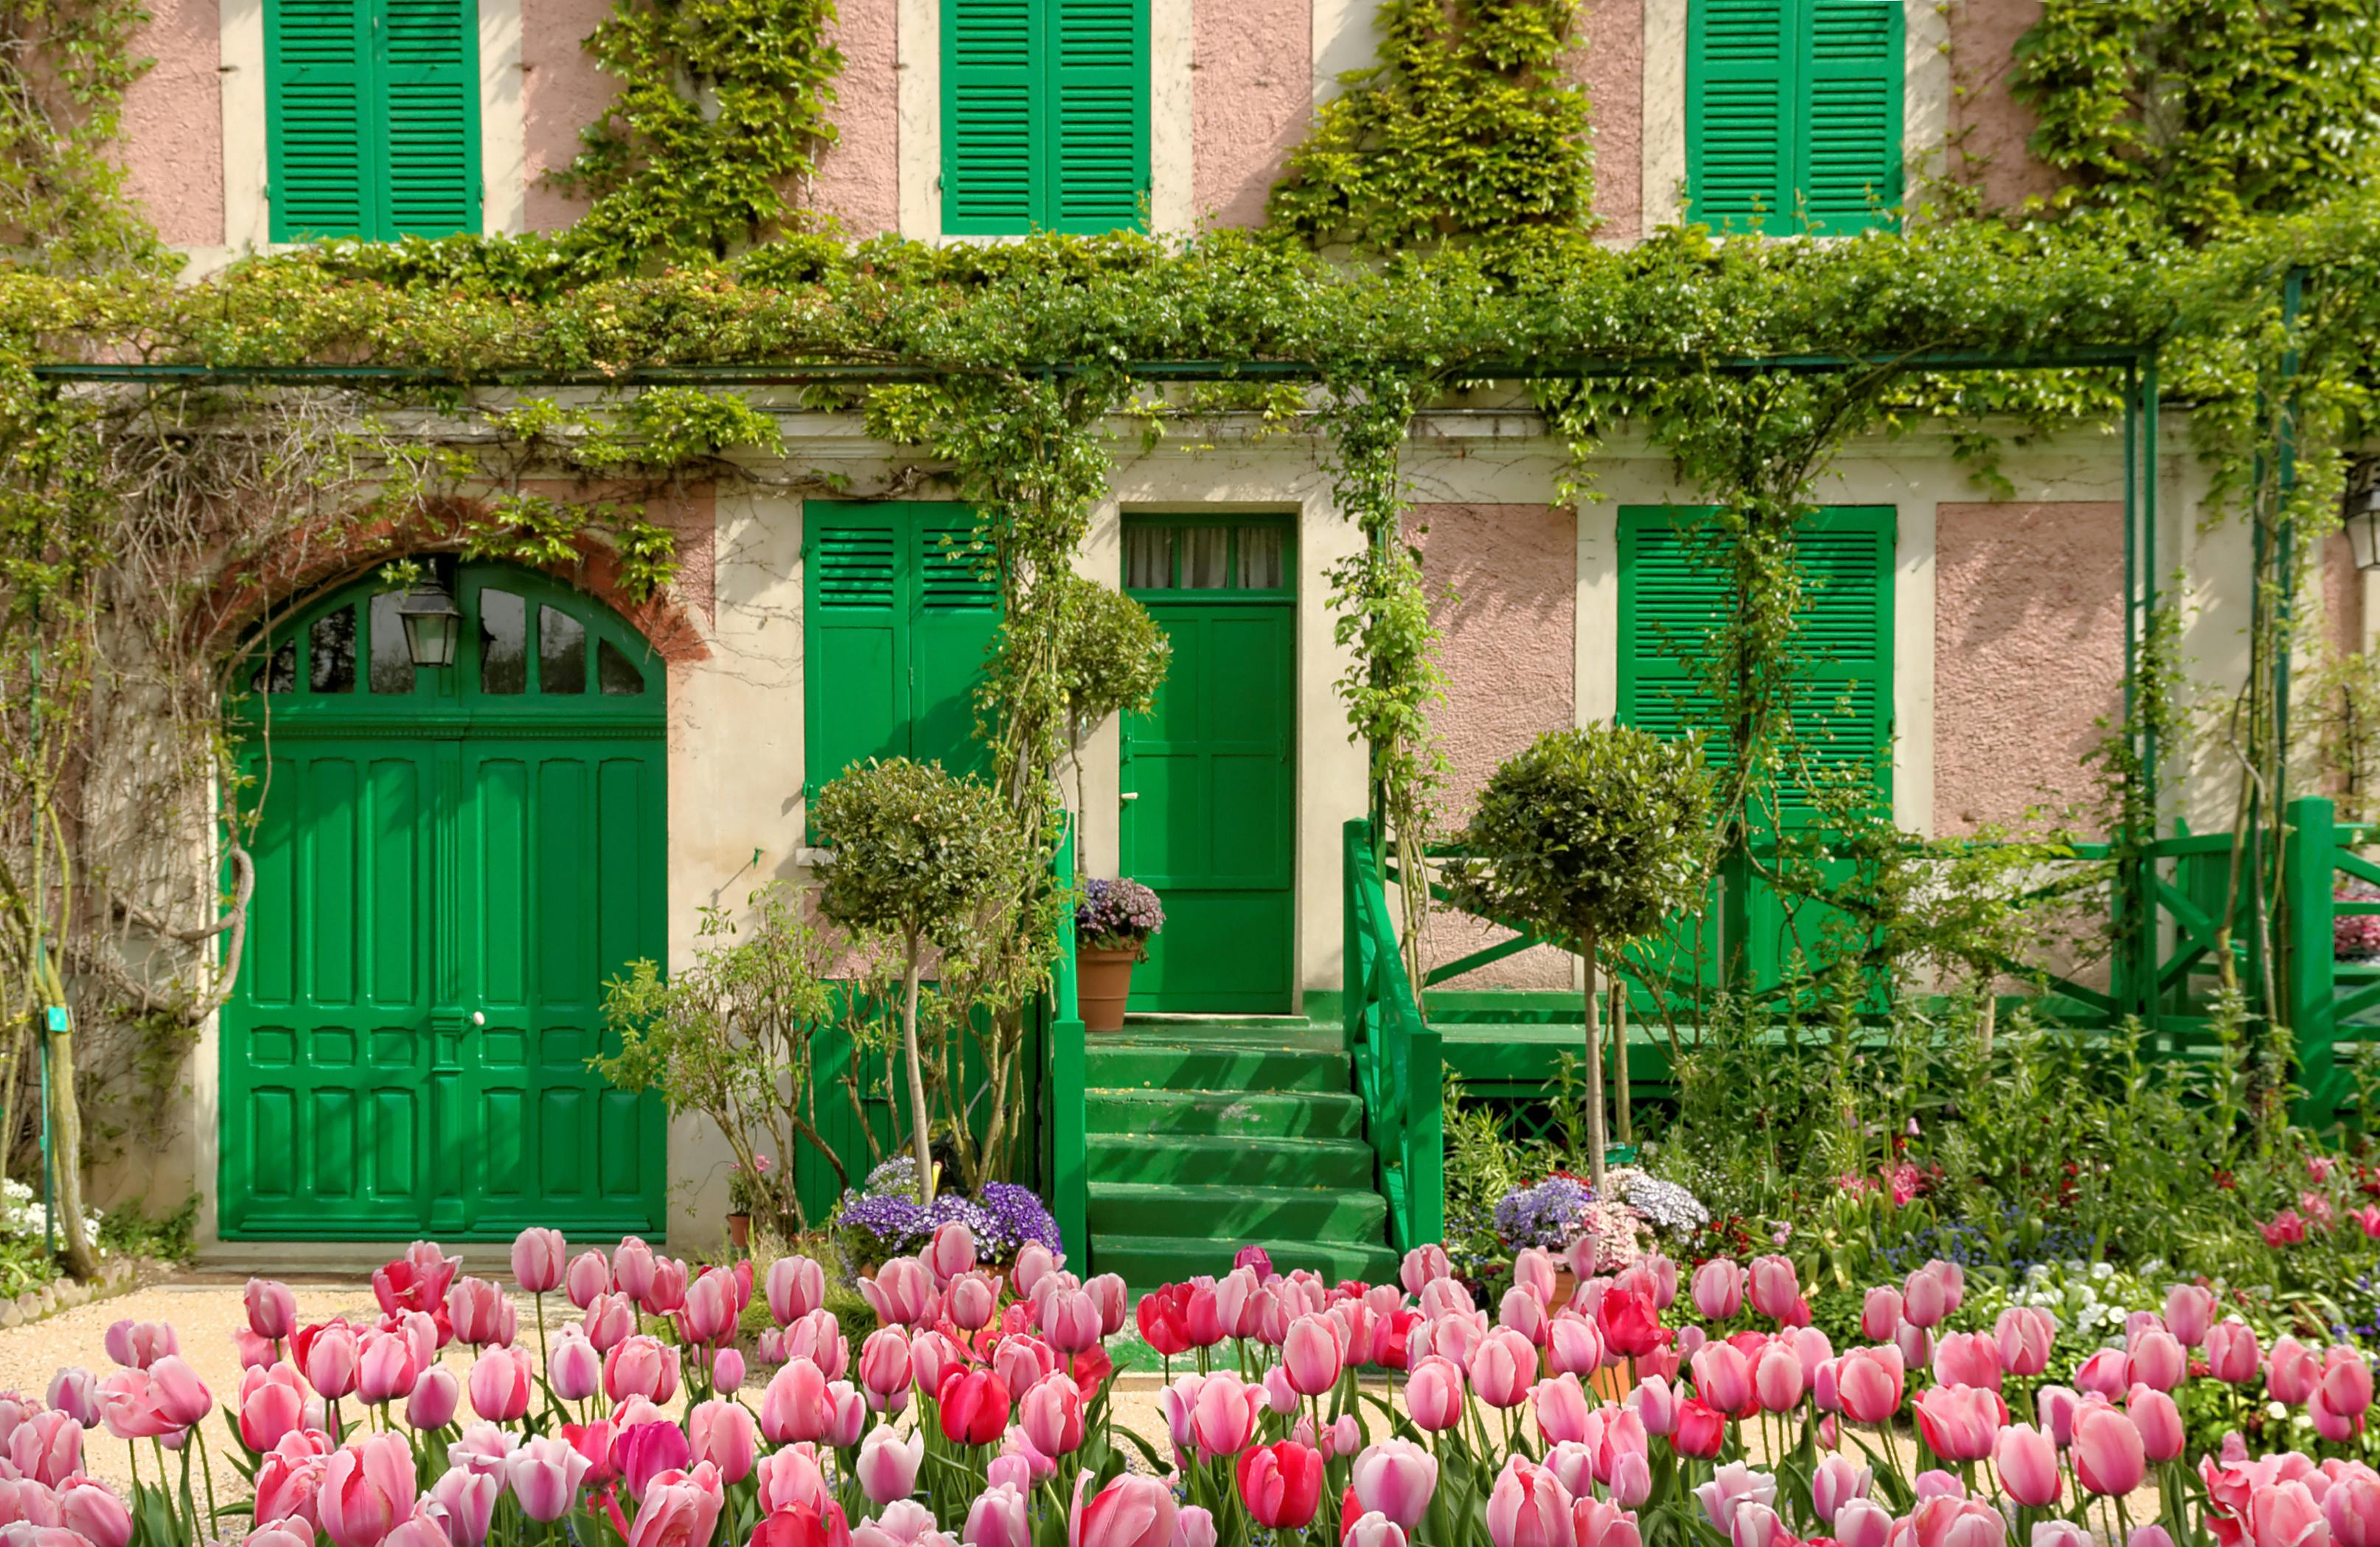 Day trip to Giverny Monet's garden and Auvers-sur-Oise with Van Gogh House from Paris